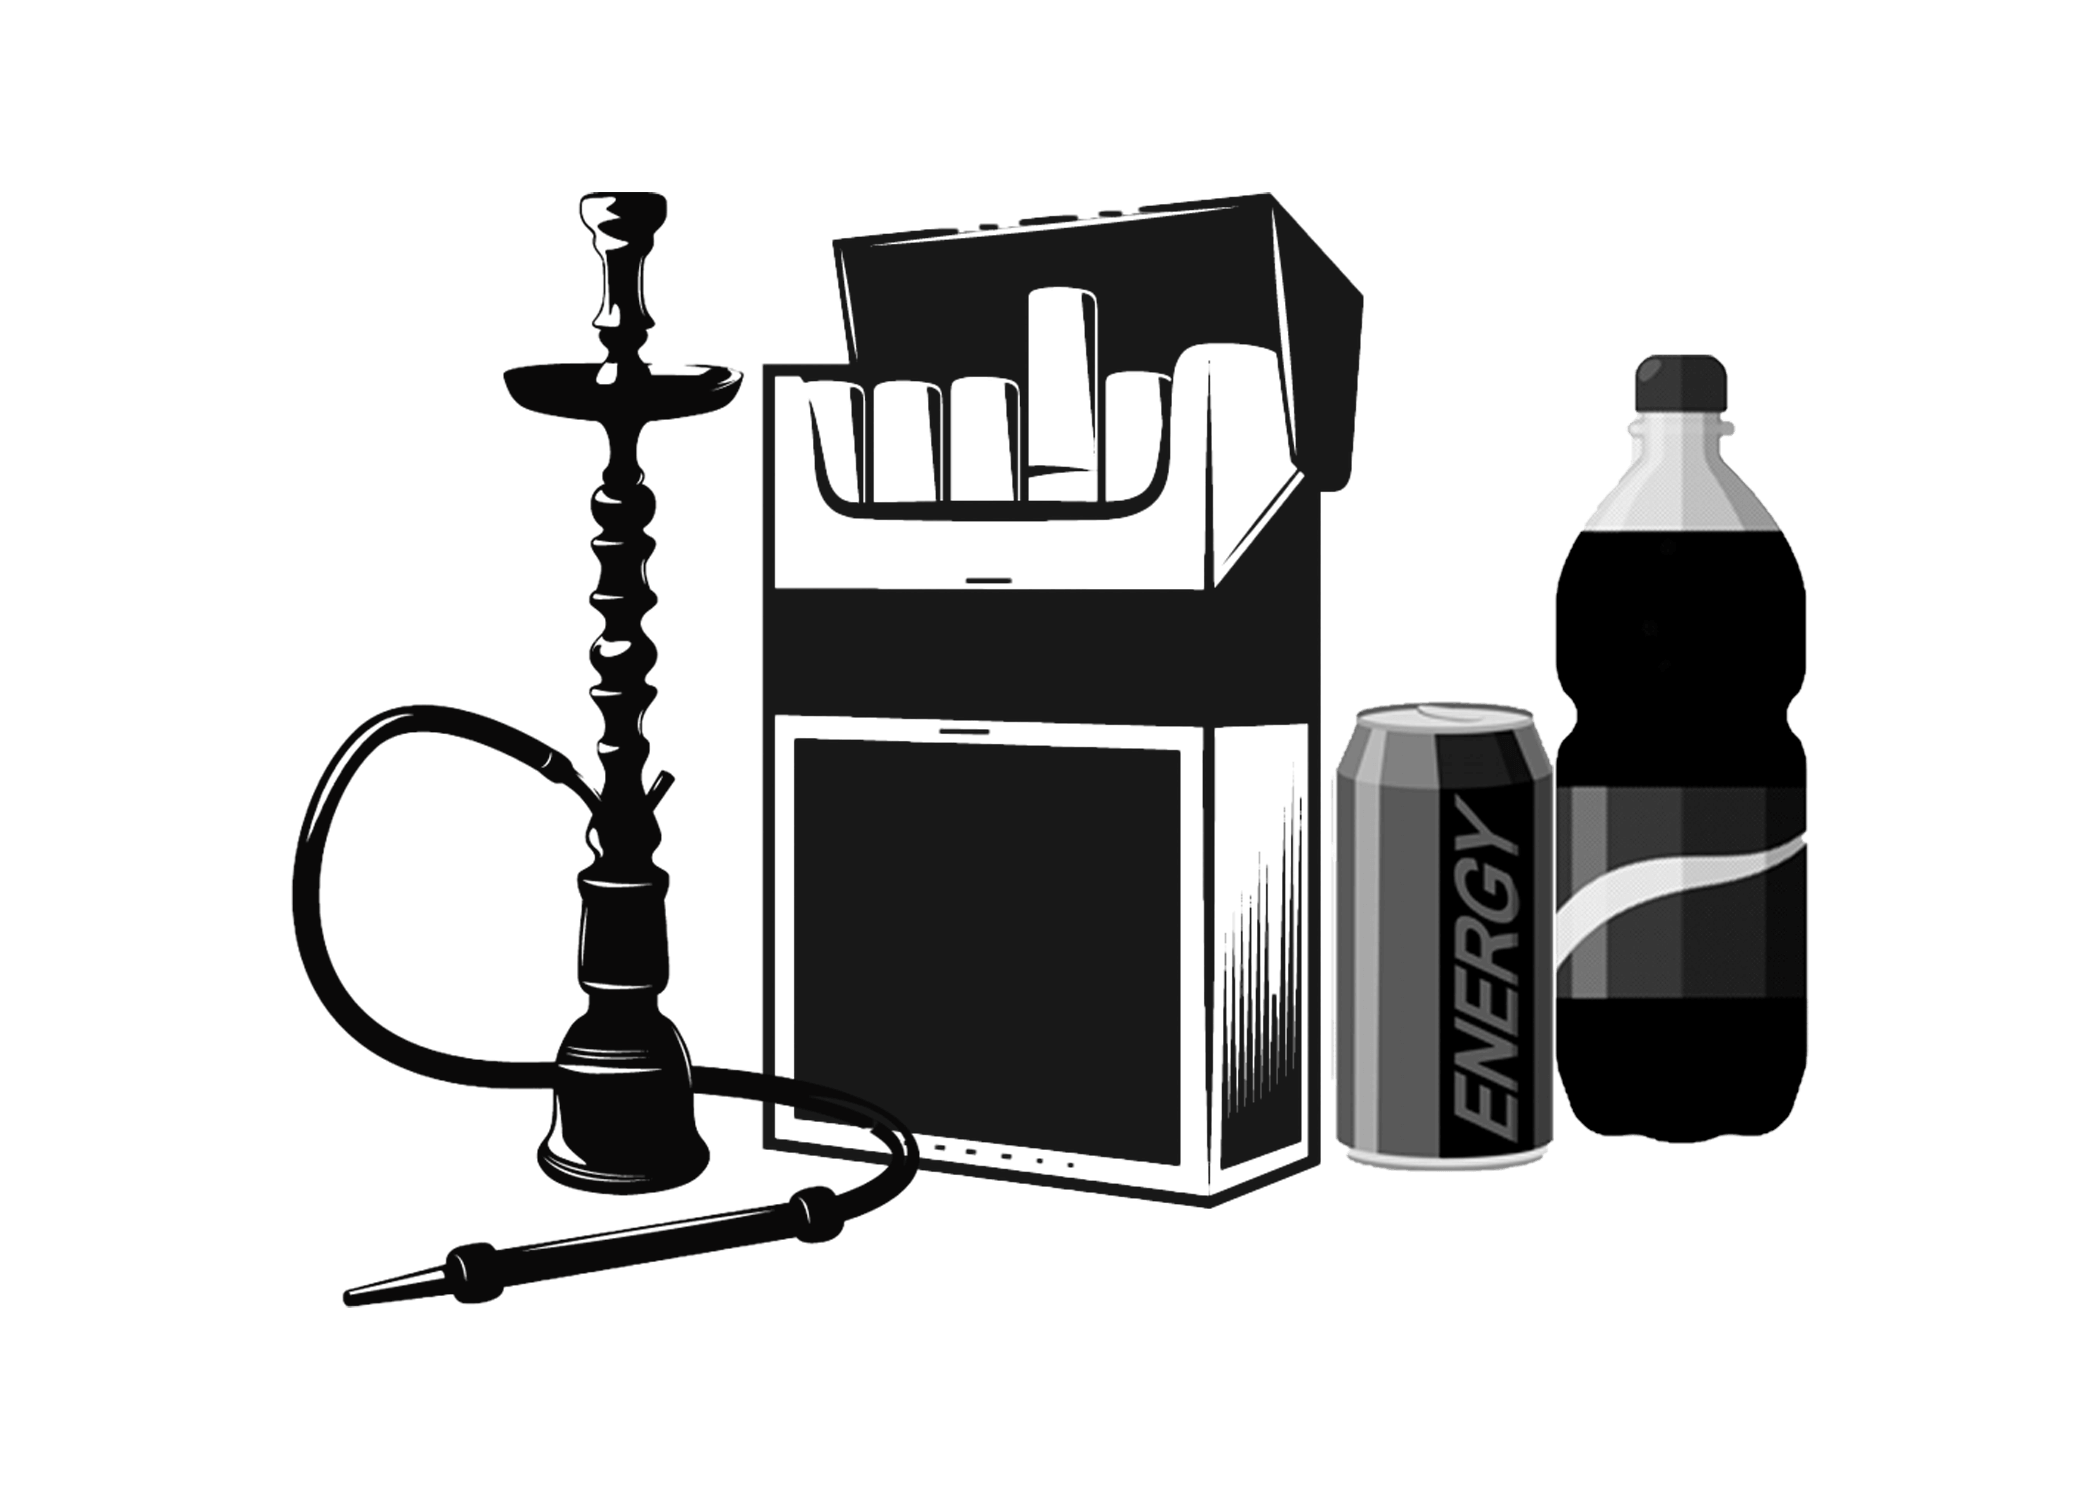 Excise Goods vector image